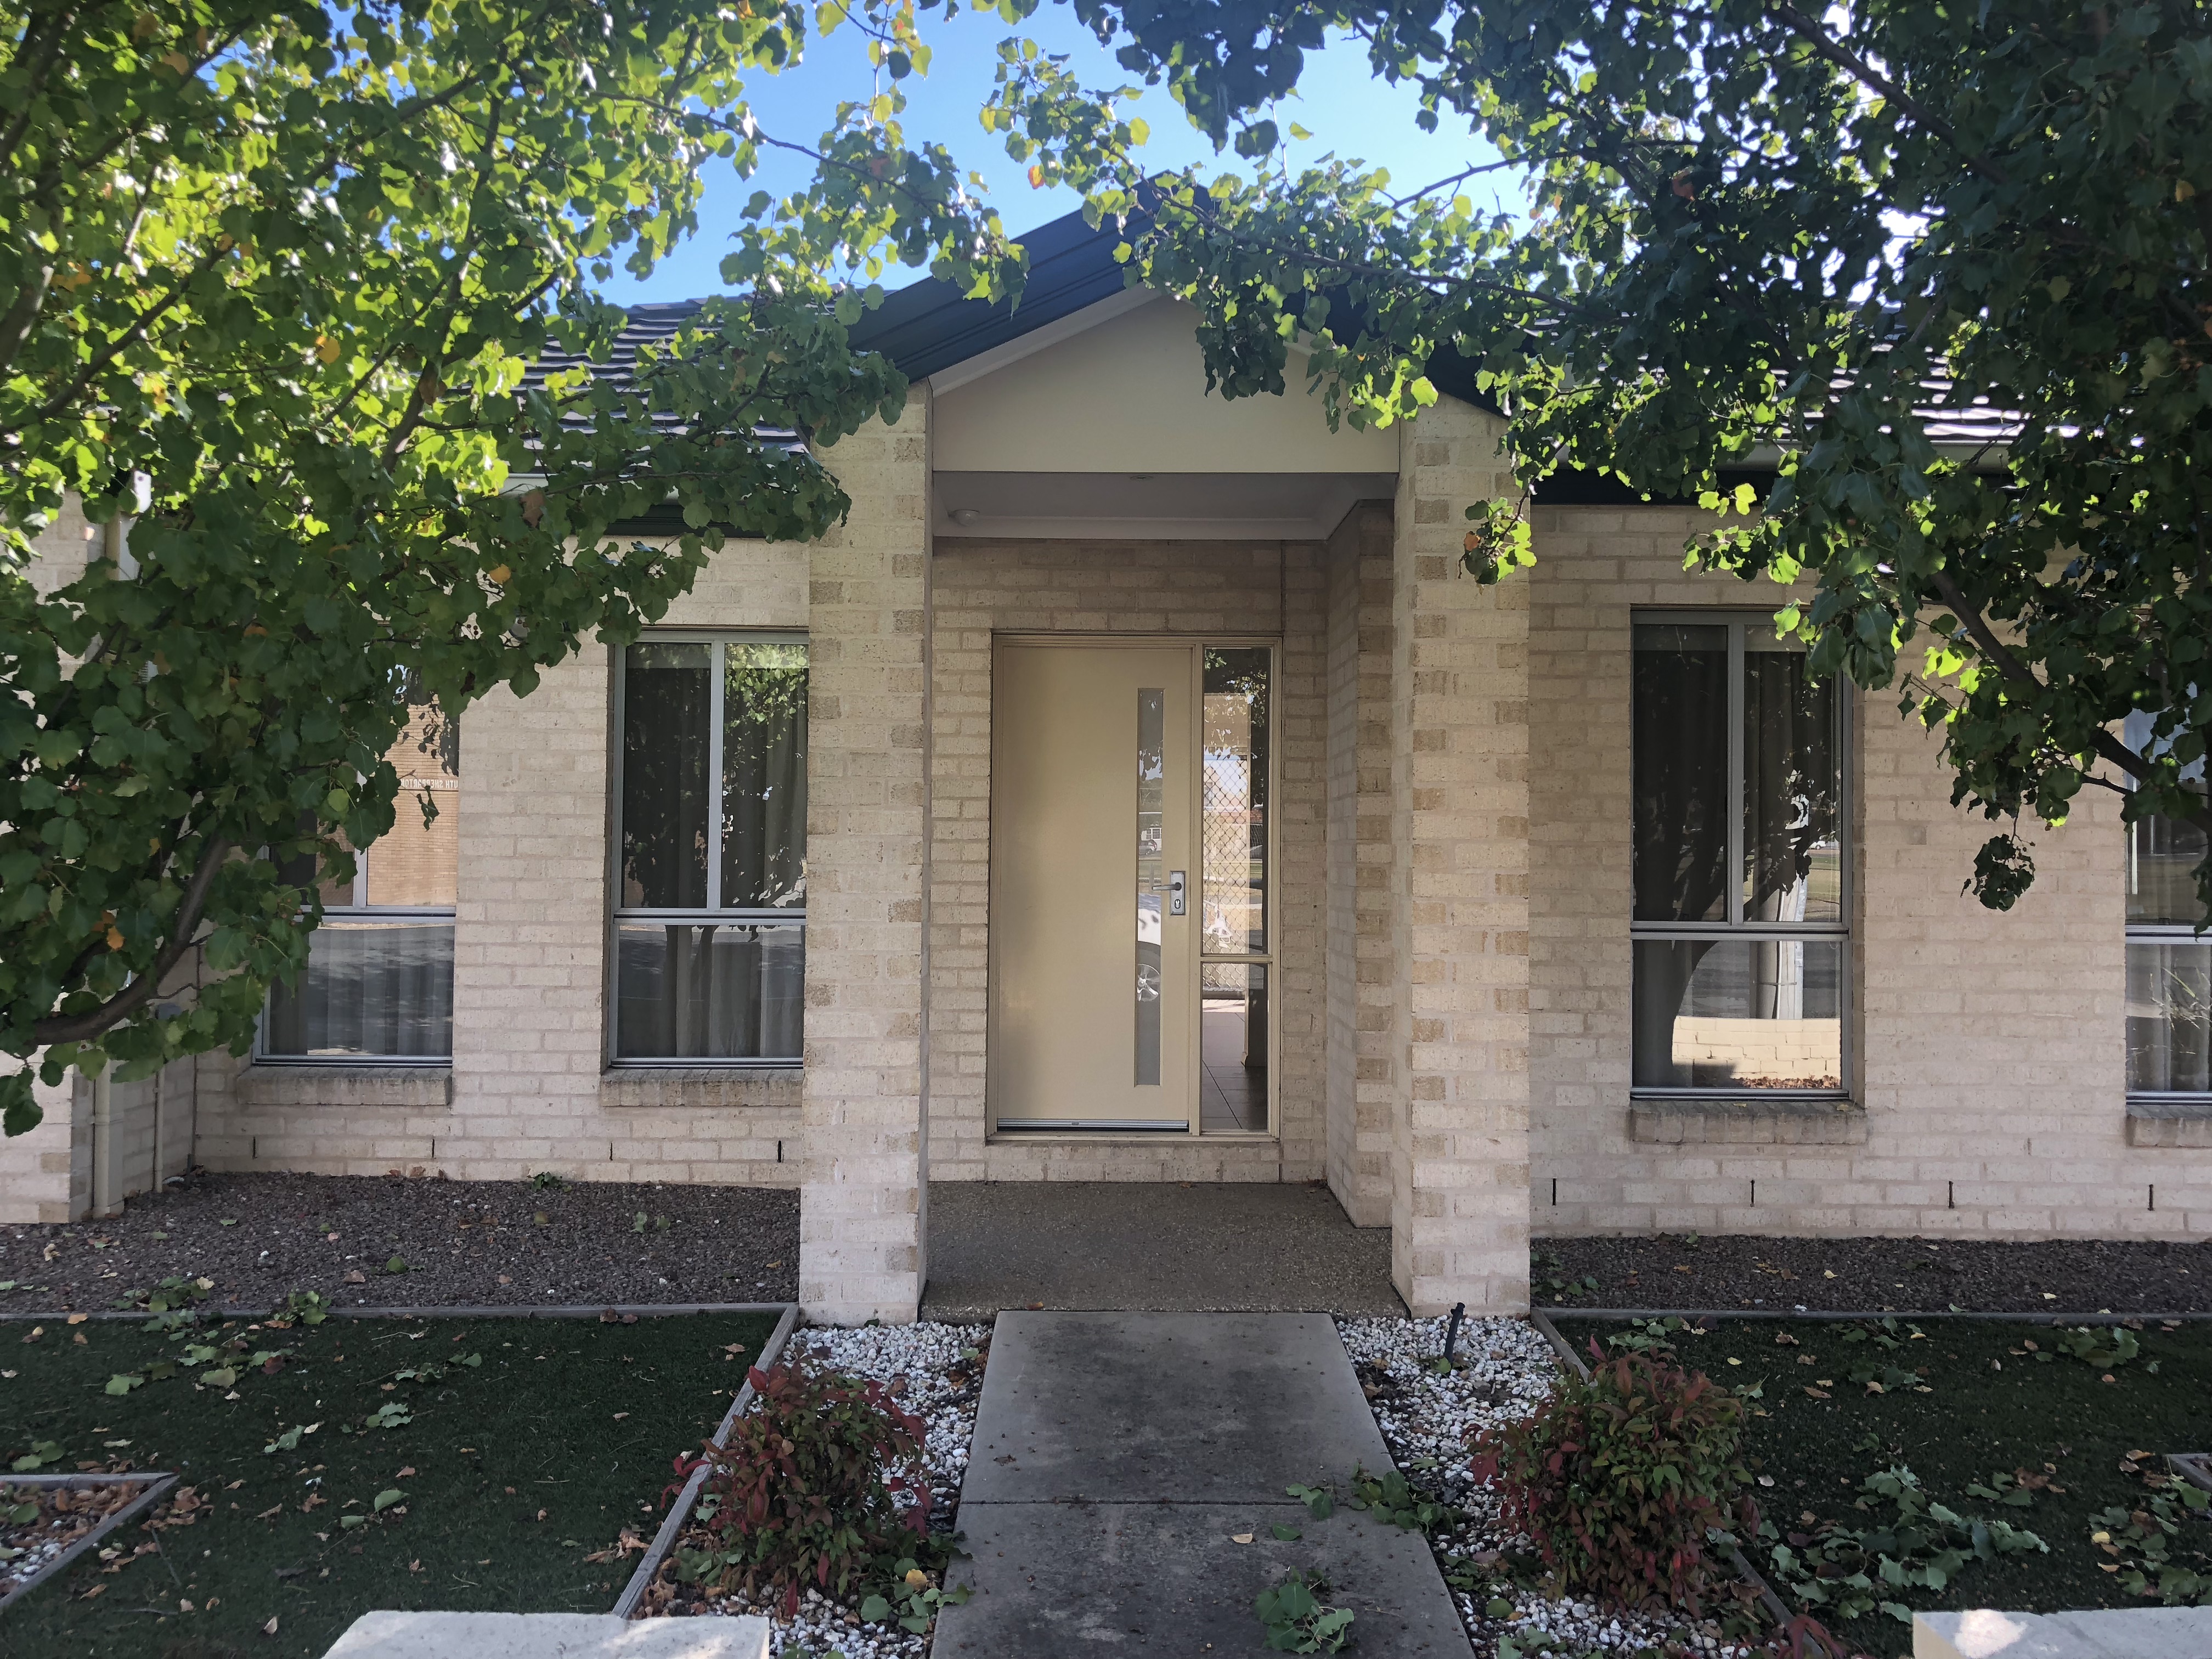 3 Bedroom 2 Bathroom Townhouse in Central Shepparton